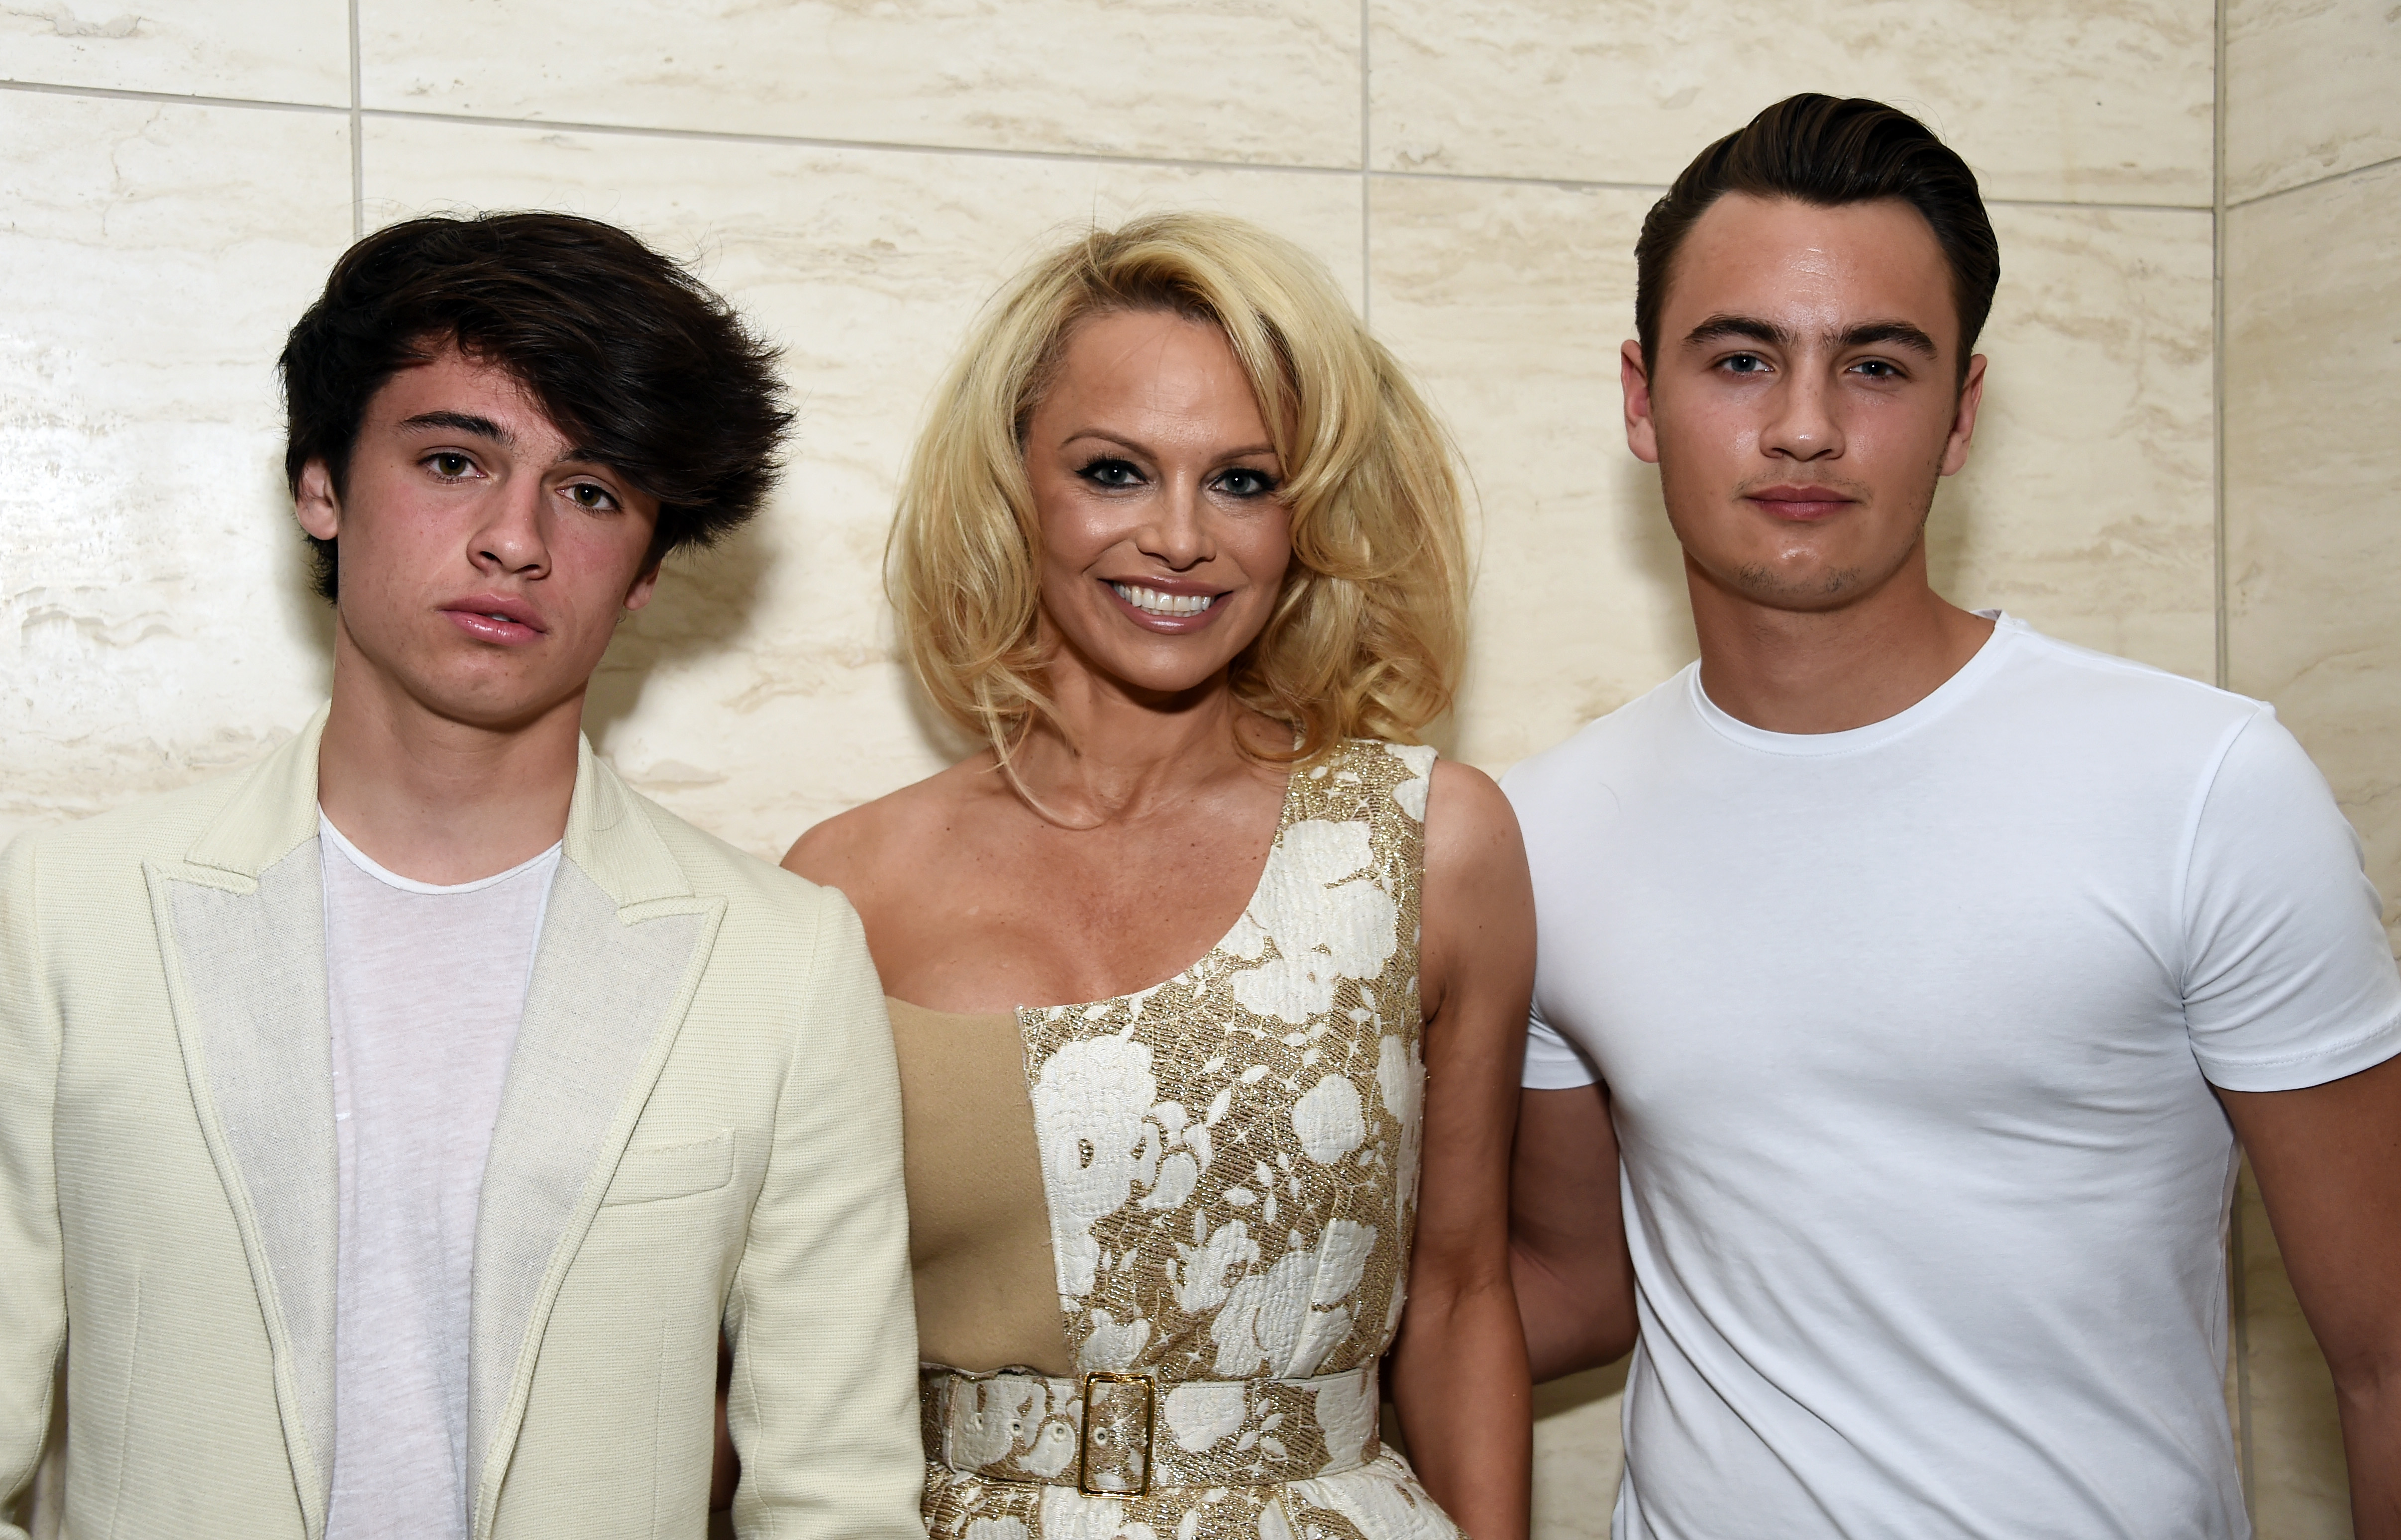 Pamela Anderson with Dylan and Brandon Lee at the special screening and reception of "Connected" at Milk Studios in Los Angeles, California on February 5, 2016 | Source: Getty Images